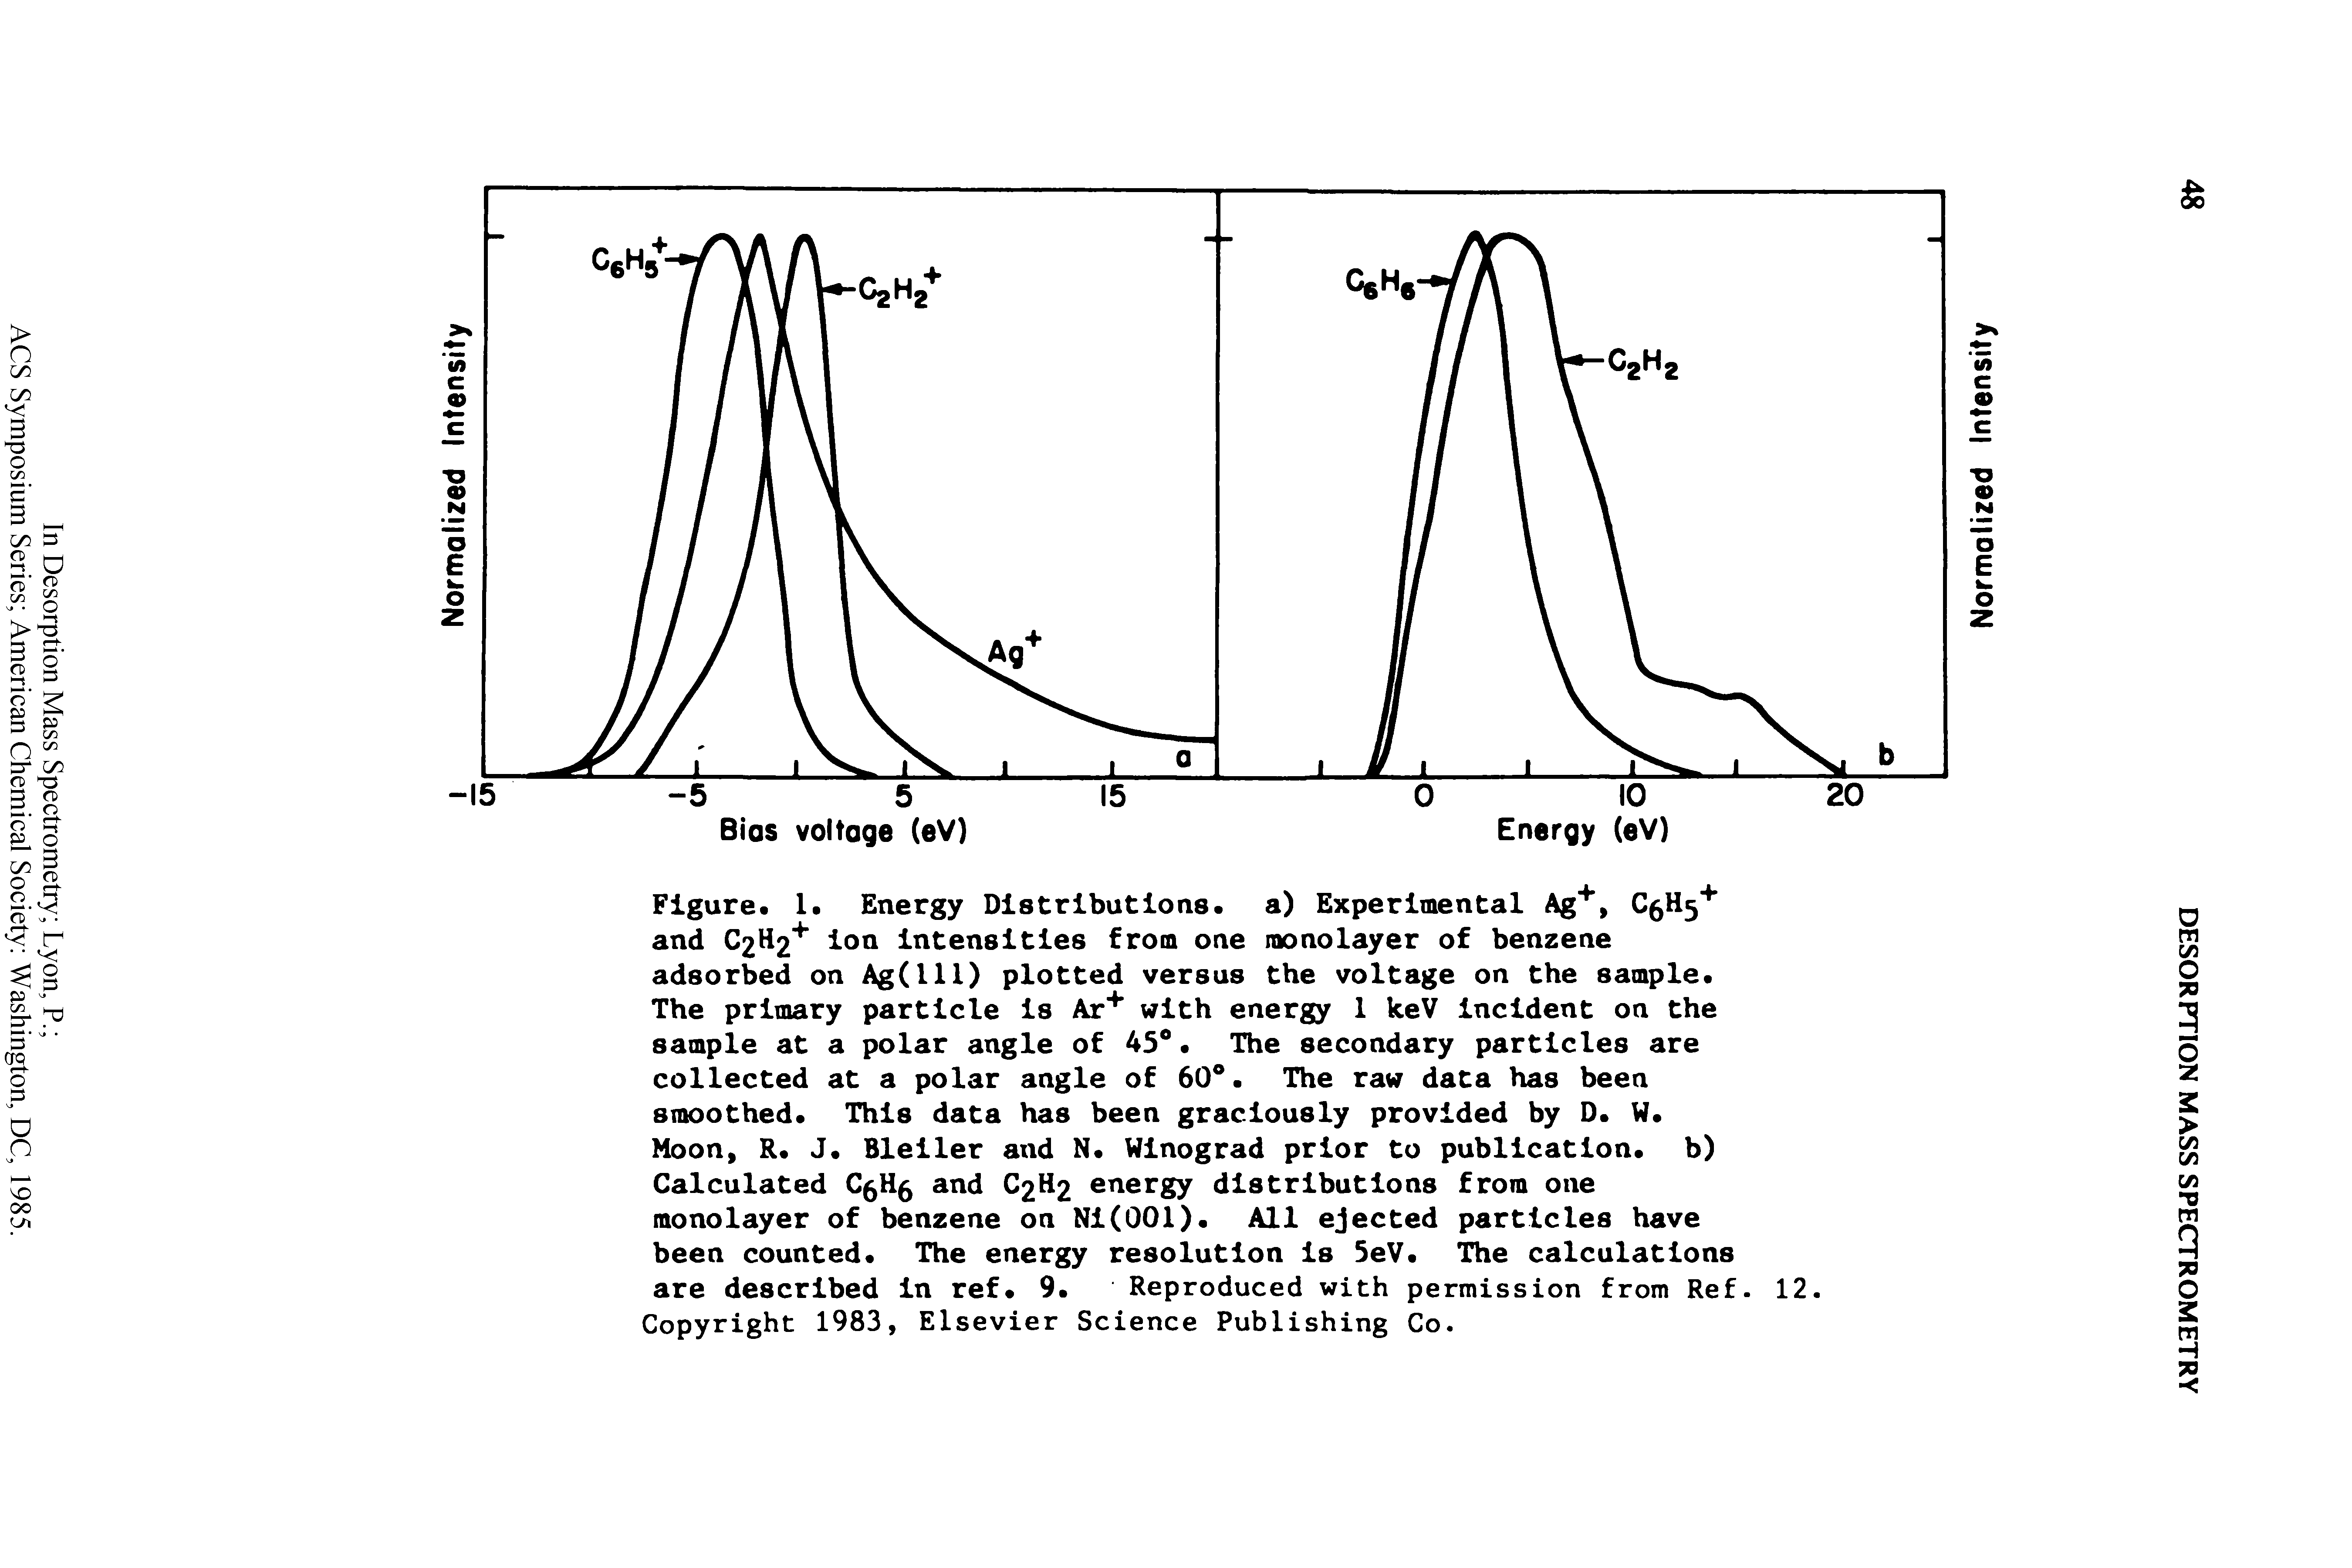 Figure. 1. Energy Distributions, a) Experimental Ag+, CfcH5+ and C2H2+ ion intensities from one monolayer of benzene adsorbed on Ag(lll) plotted versus the voltage on the sample.